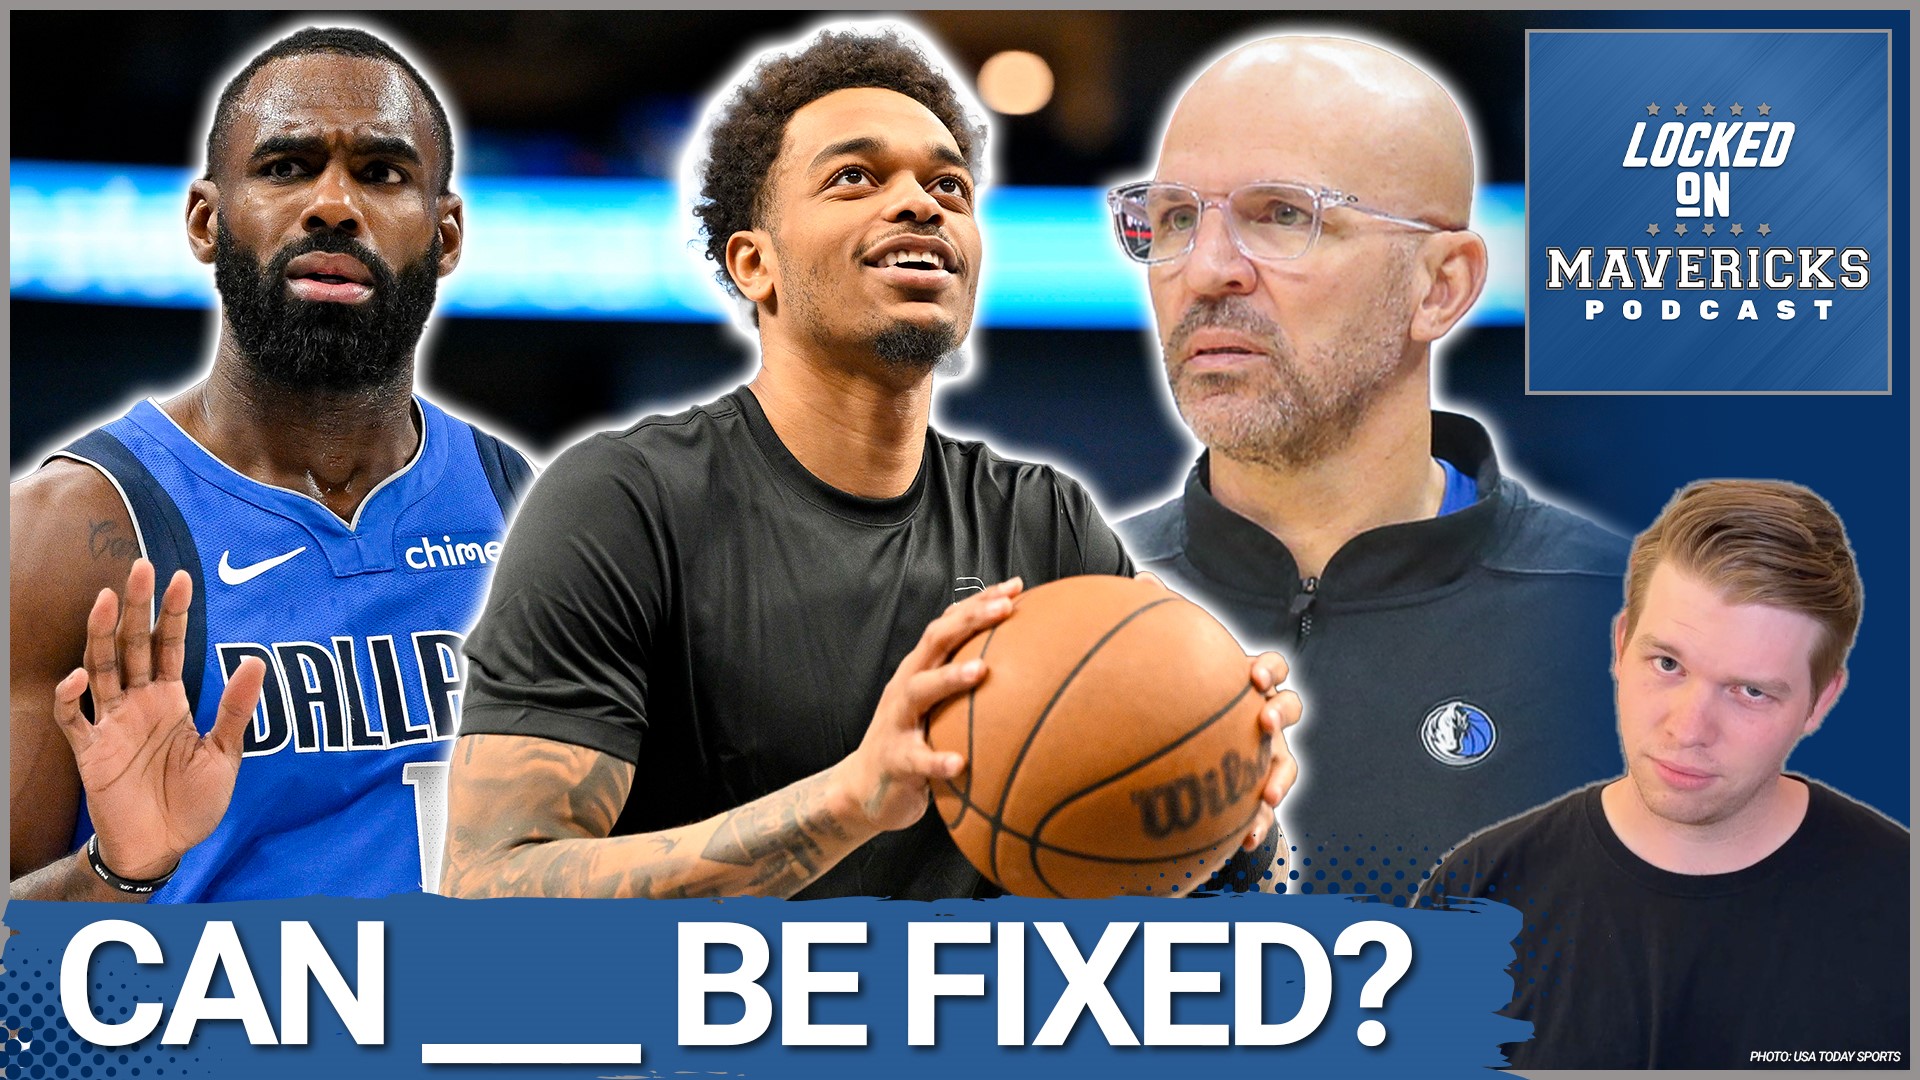 Nick Angstadt answers your Dallas Mavericks questions on PJ Washington, Tim Hardaway Jr, and more Mavs trying to help Luka Doncic & Kyrie Irving.